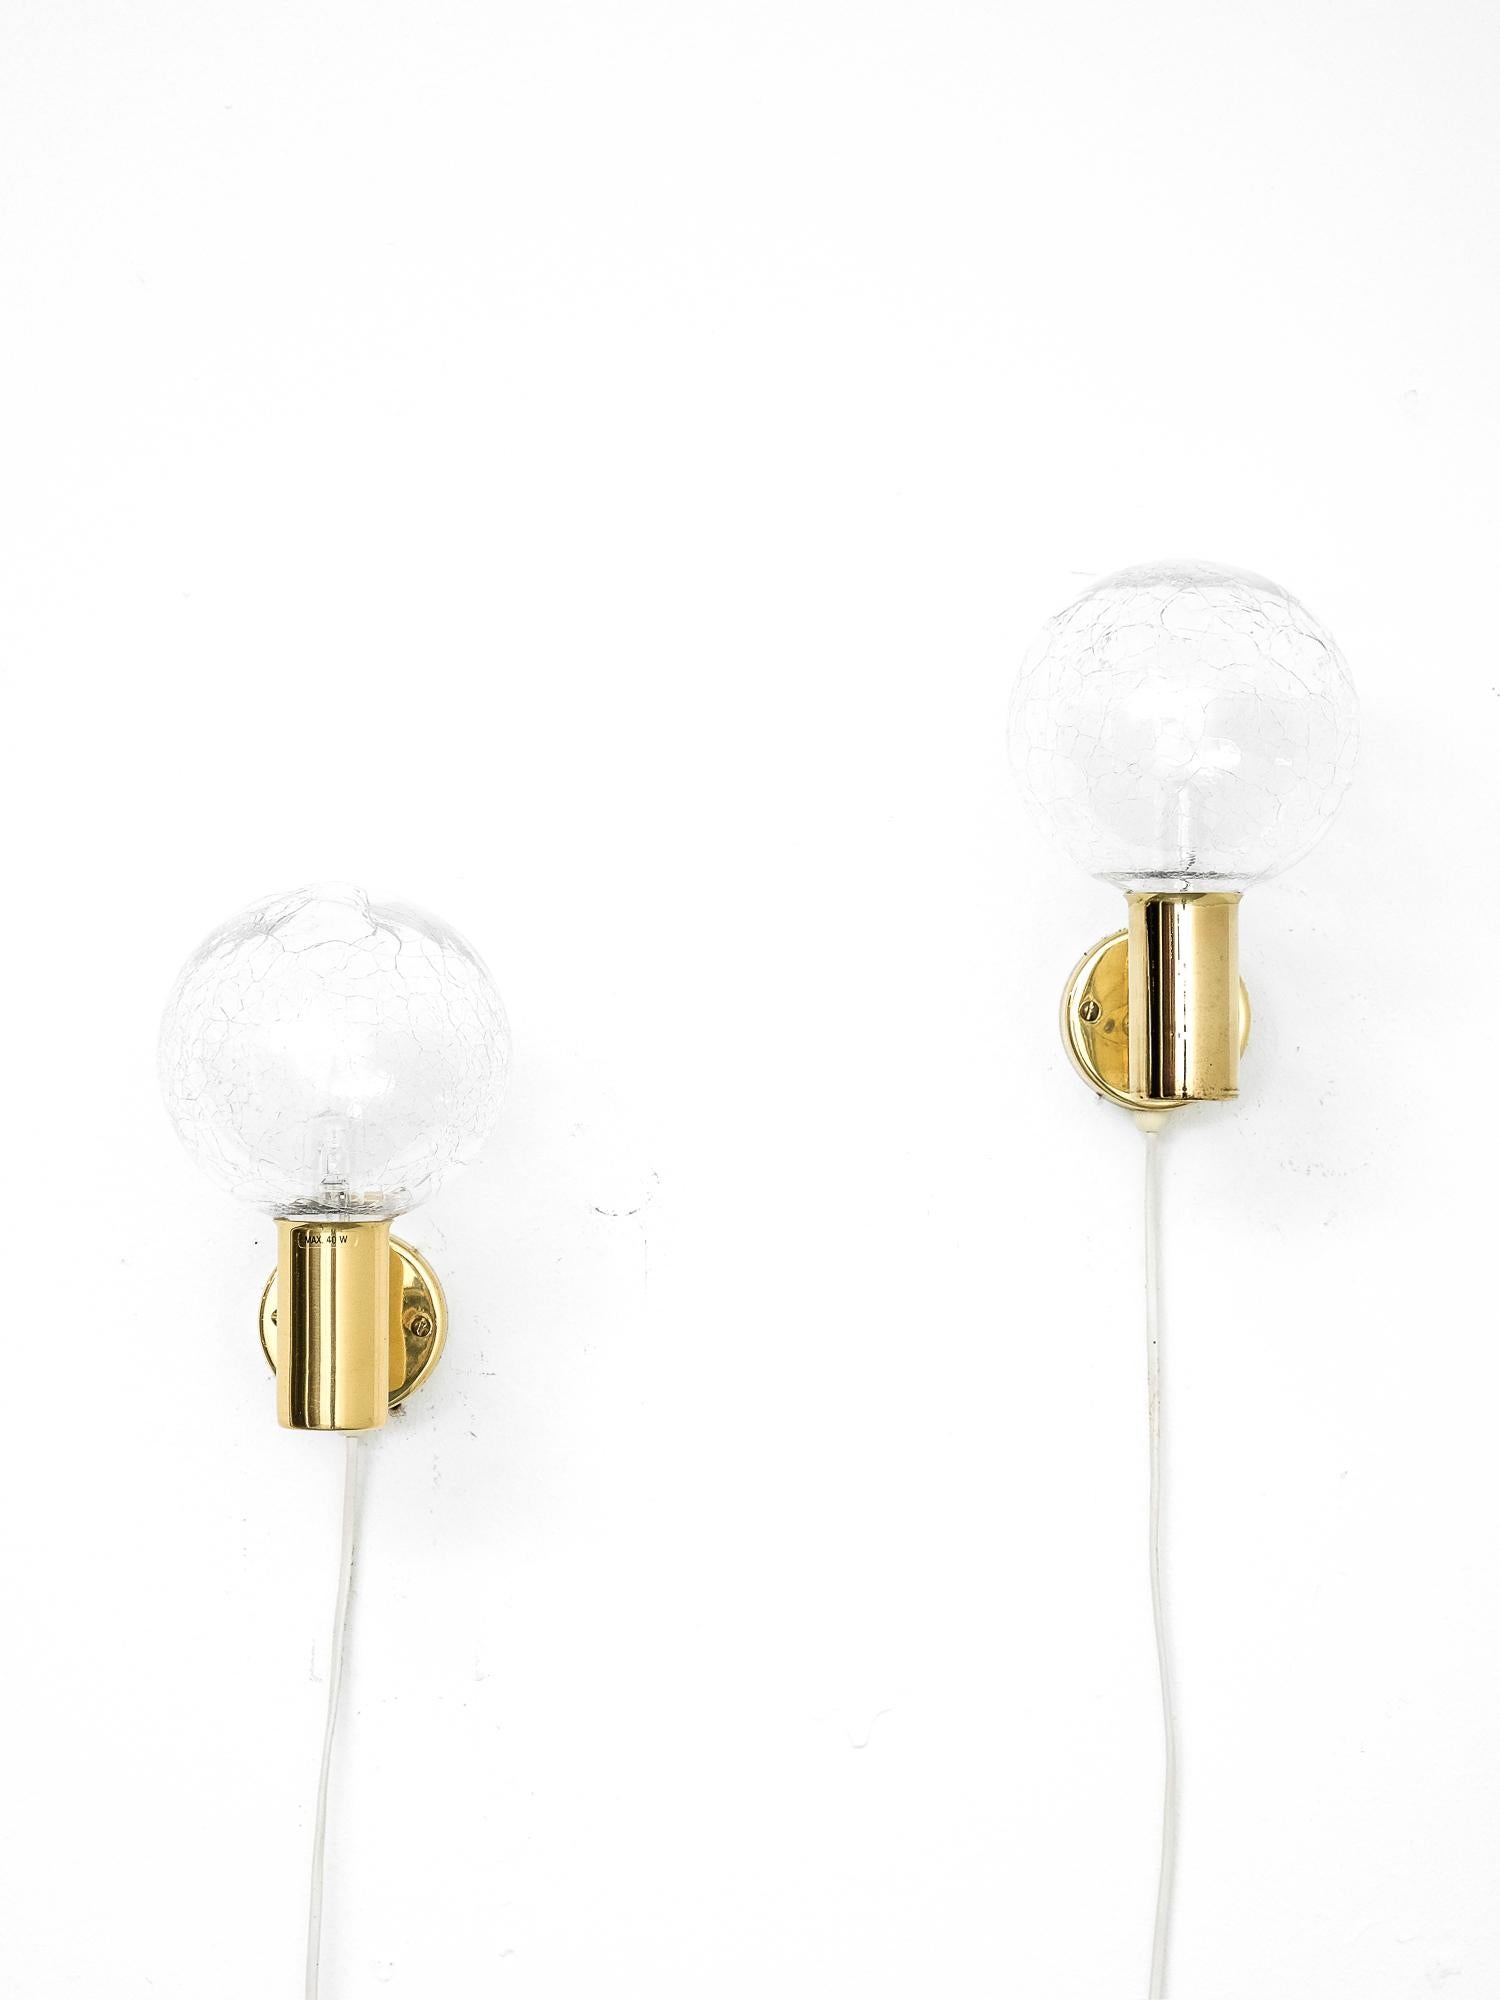 Pair of 1960s wall lamps model V-149 designed by Hans-Agne Jakobsson. Produced by Hans-Agne Jakobsson AB in Markaryd, Sweden.

Clear glass globes with broken effect that gives superb atmospheric light. Wall-mounted brass part is in nice